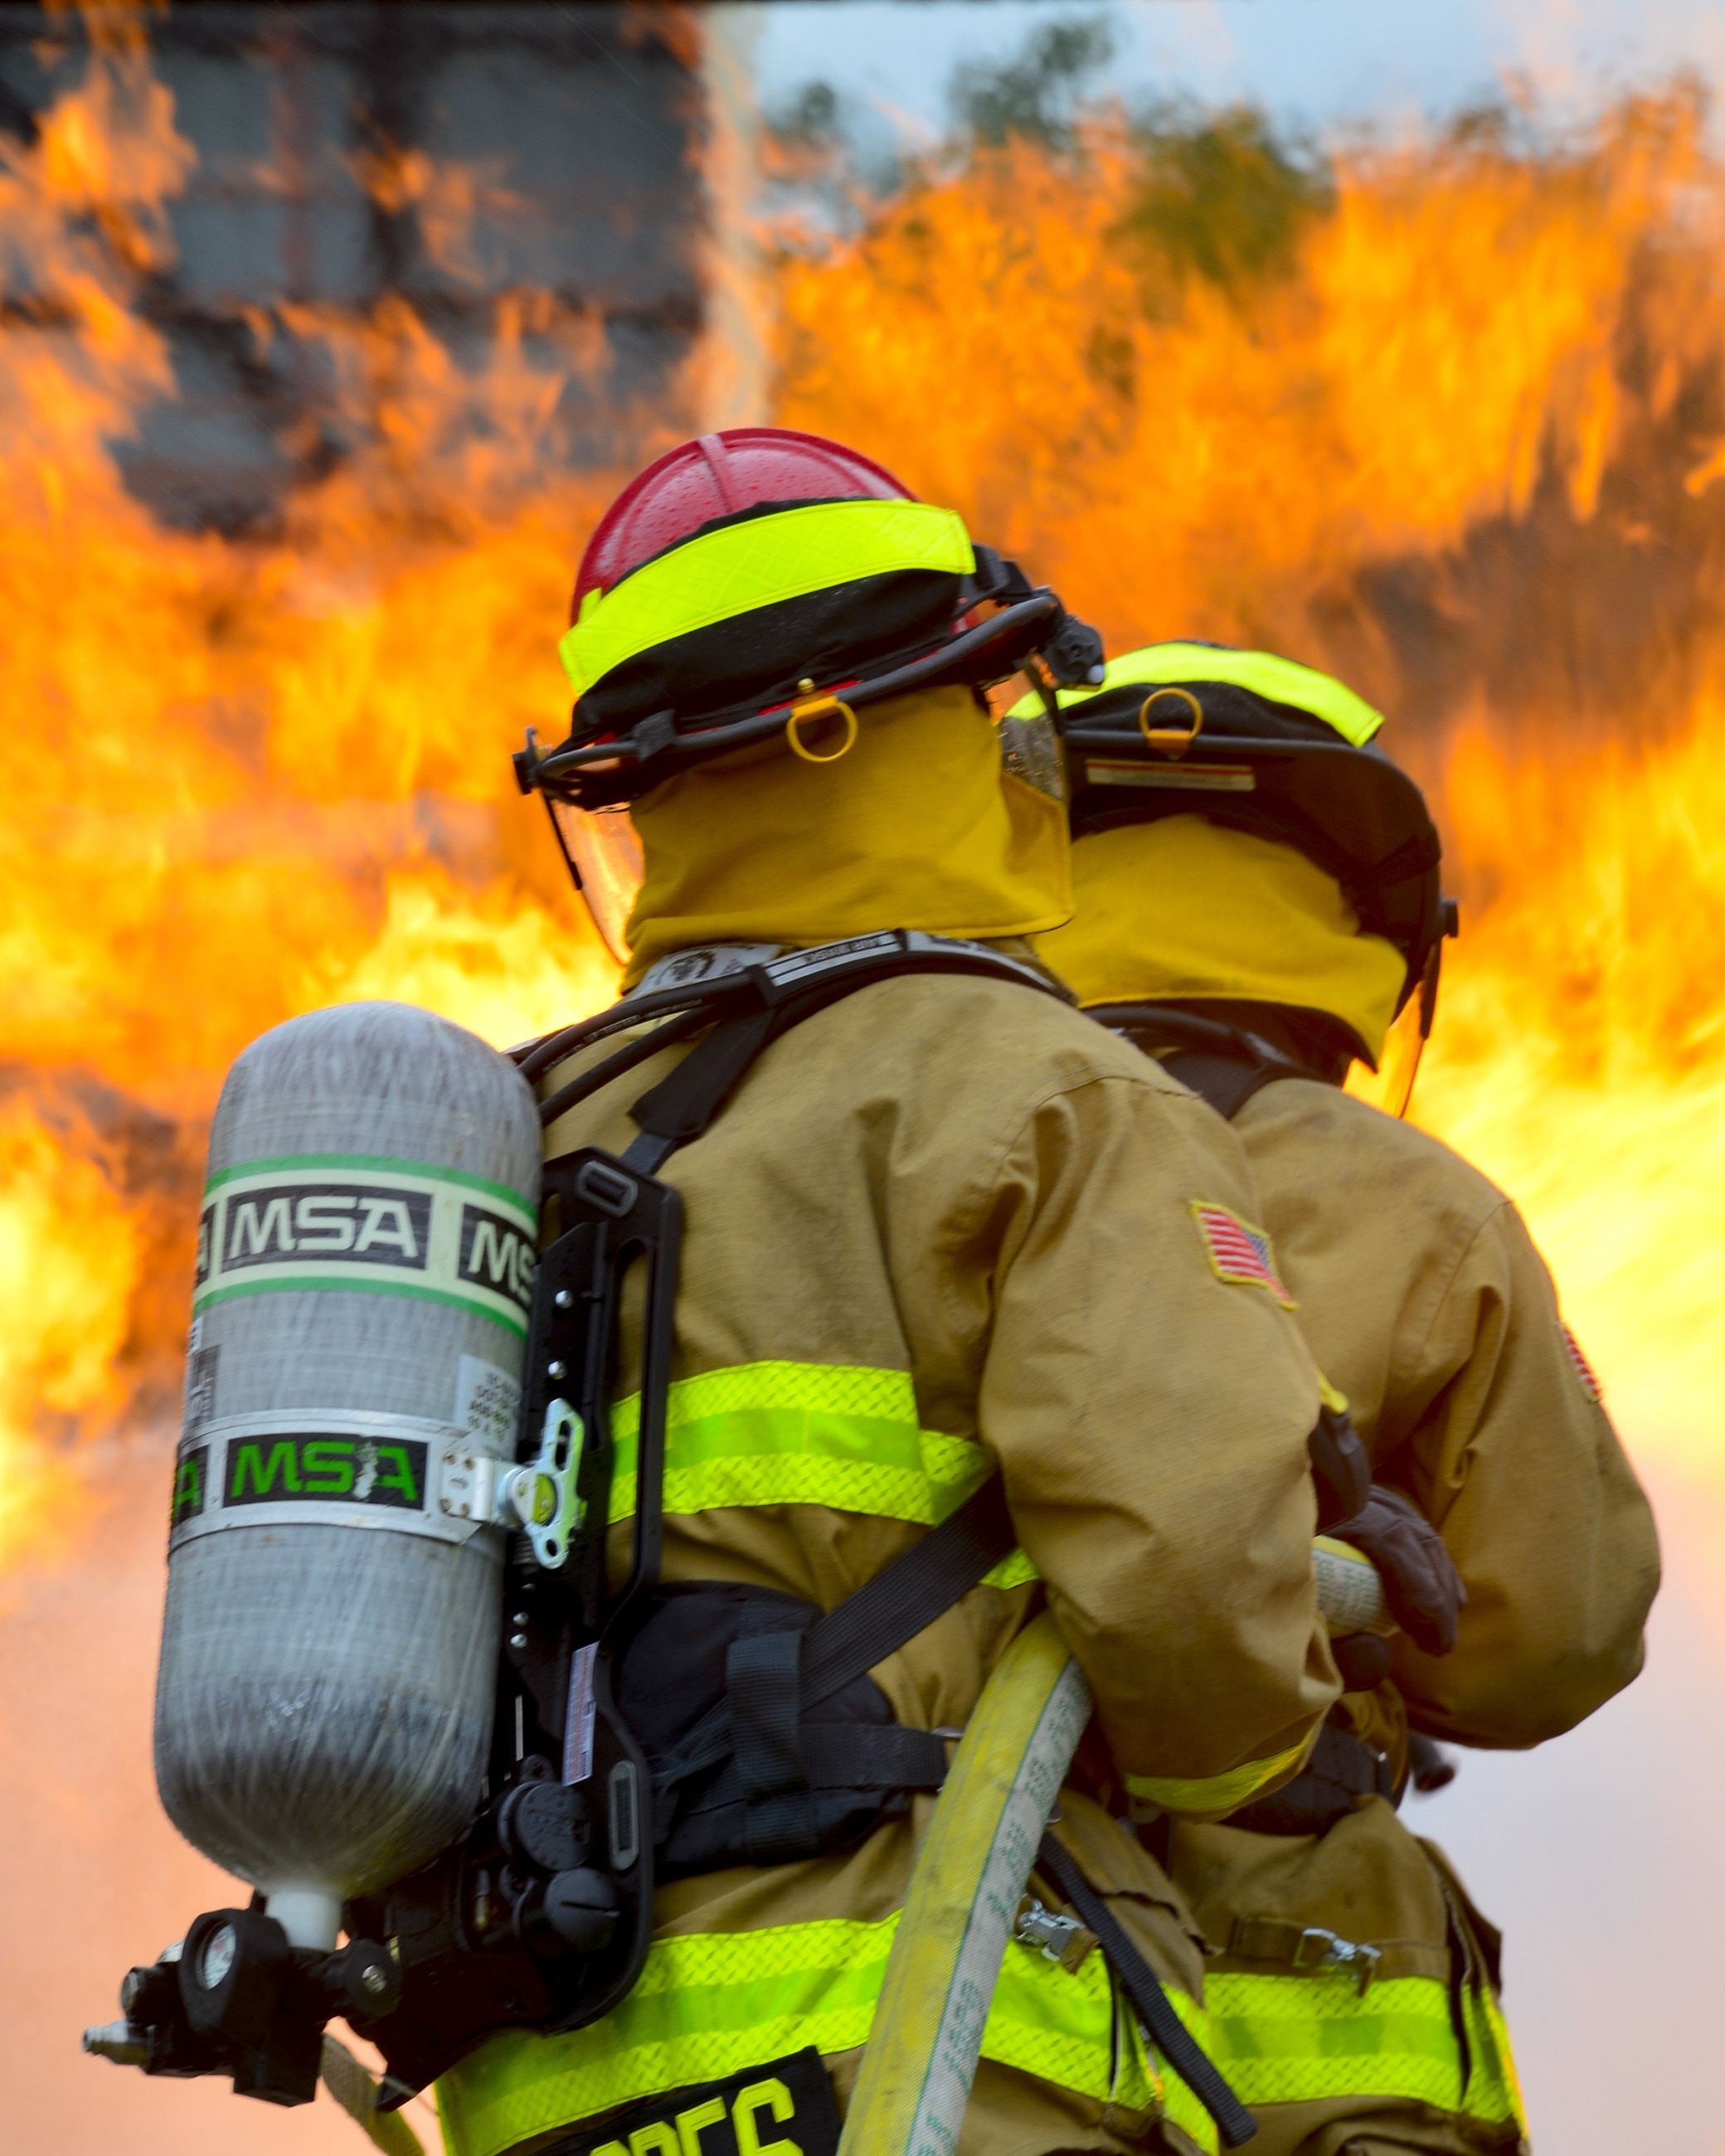 Firefighters, Fire, Training, Portrait, firefighter, accidents and disasters